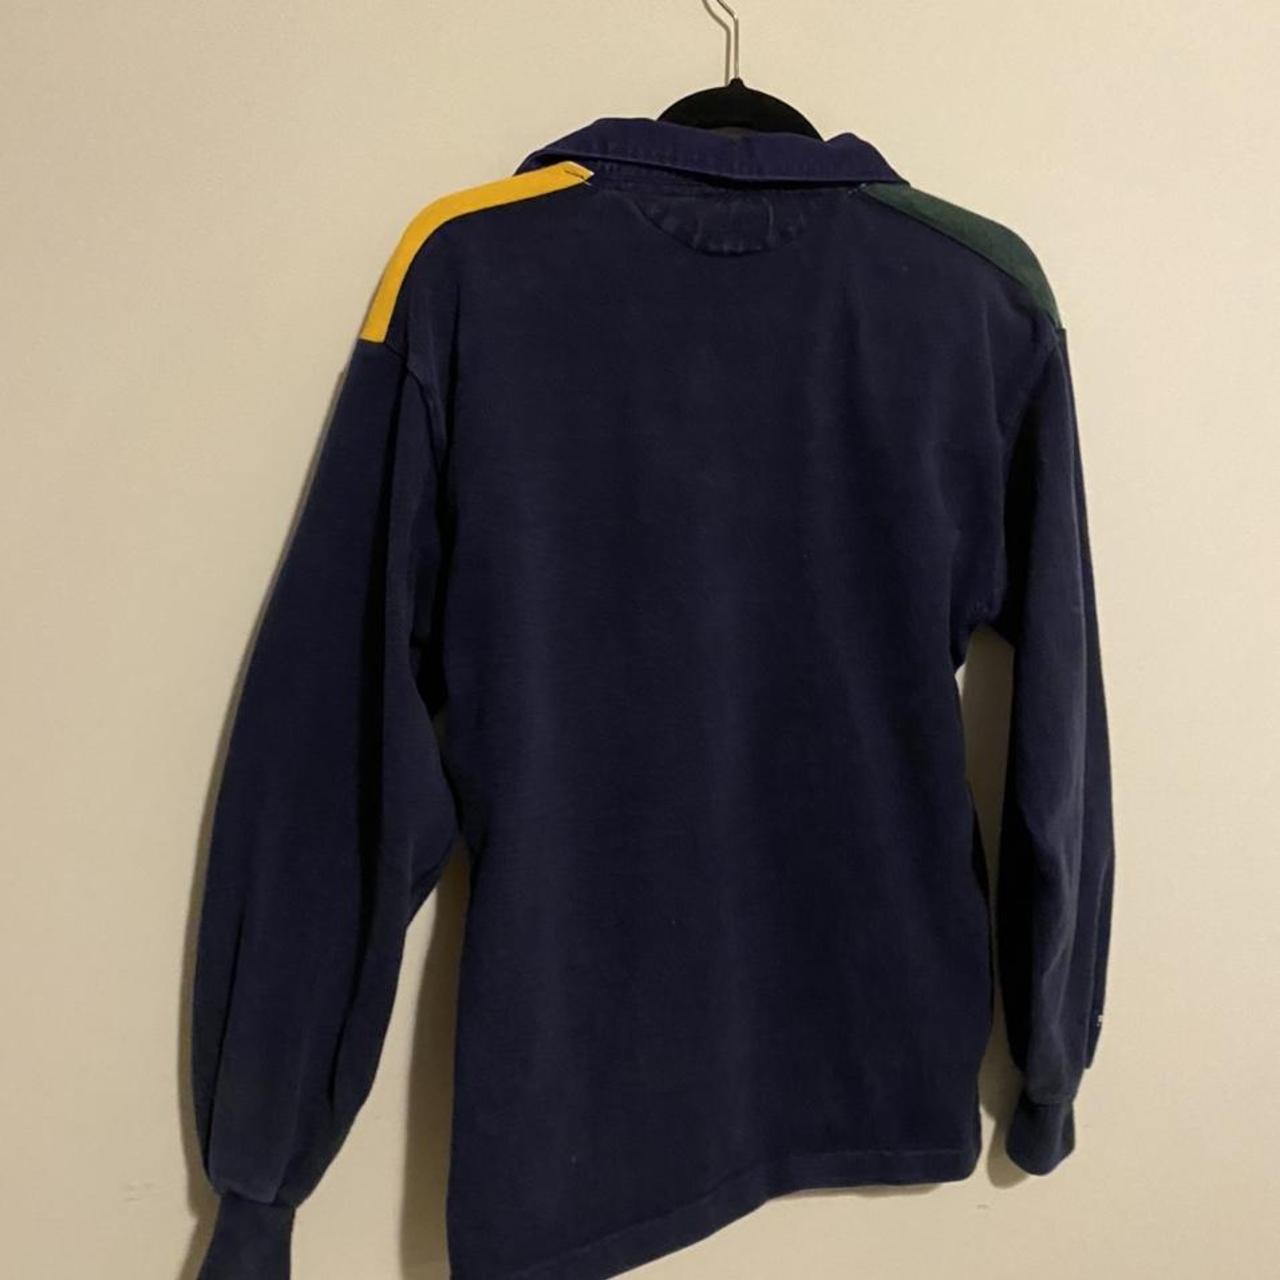 Product Image 3 - Vintage Notre Dame Barbarian Rugby